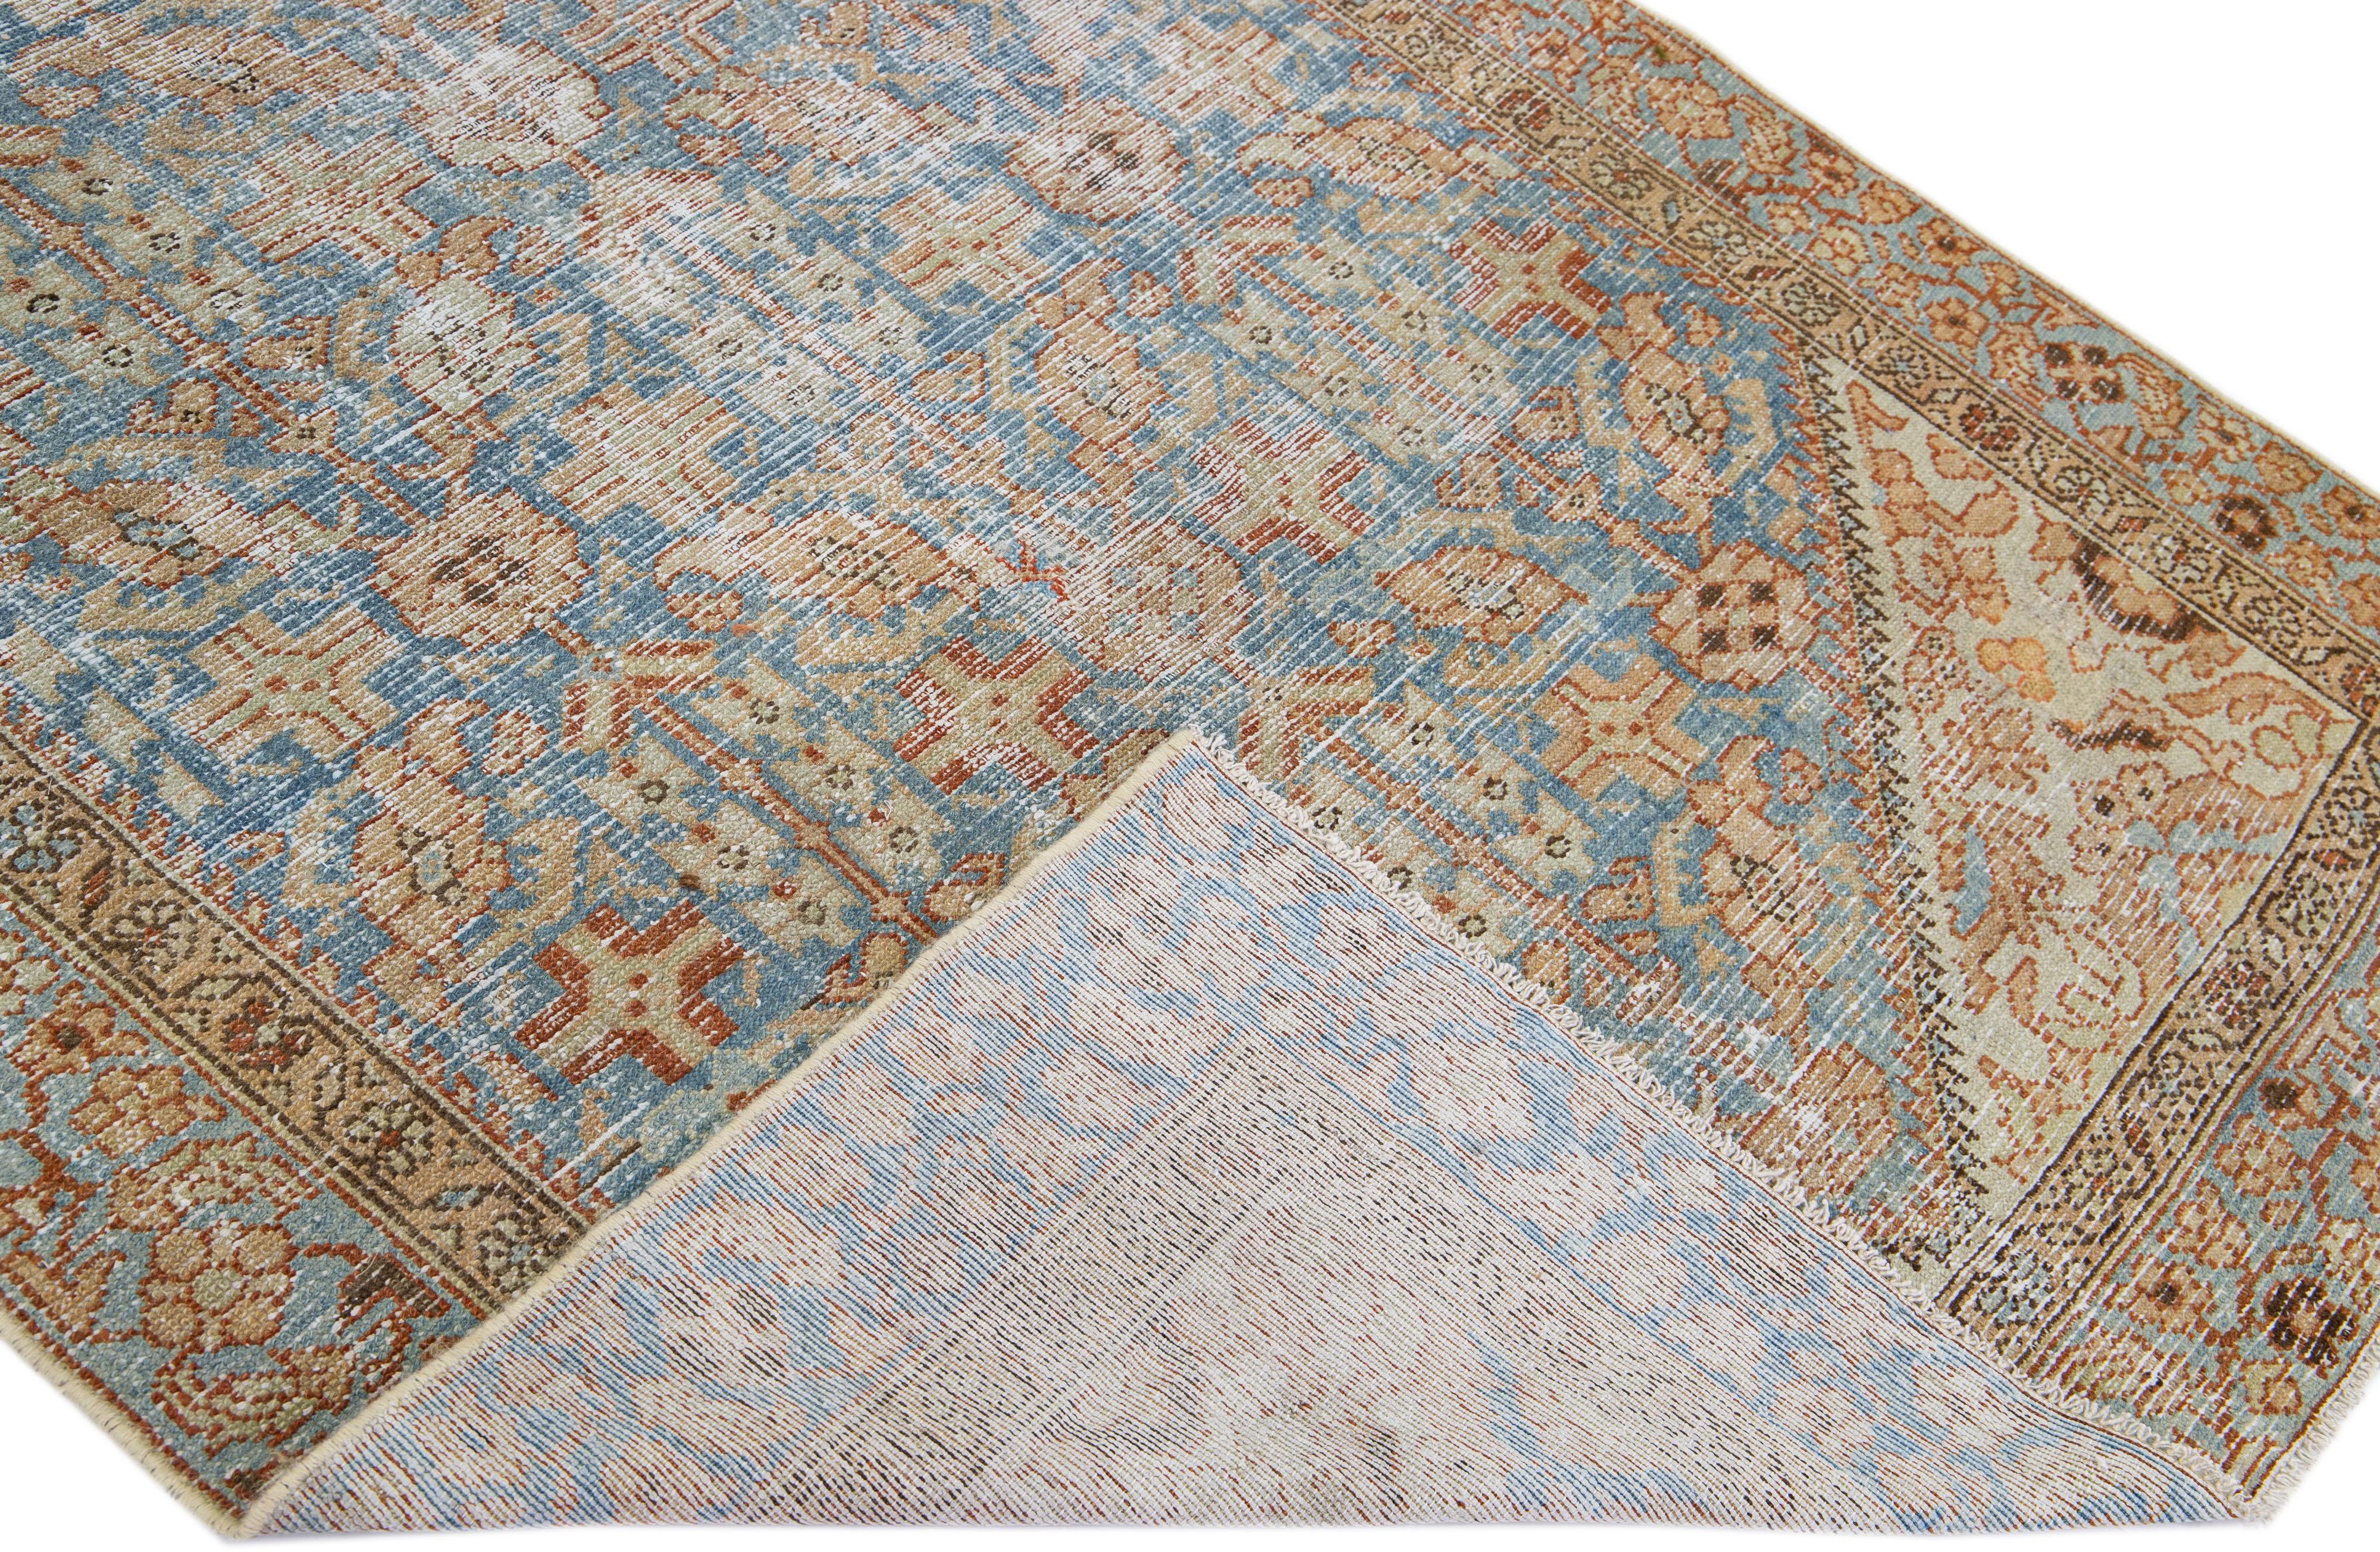 Beautiful antique Malayer hand-knotted wool rug with a blue field. This Persian piece has tan and brown accents in a gorgeous all-over floral design.

This rug measures: 4'8